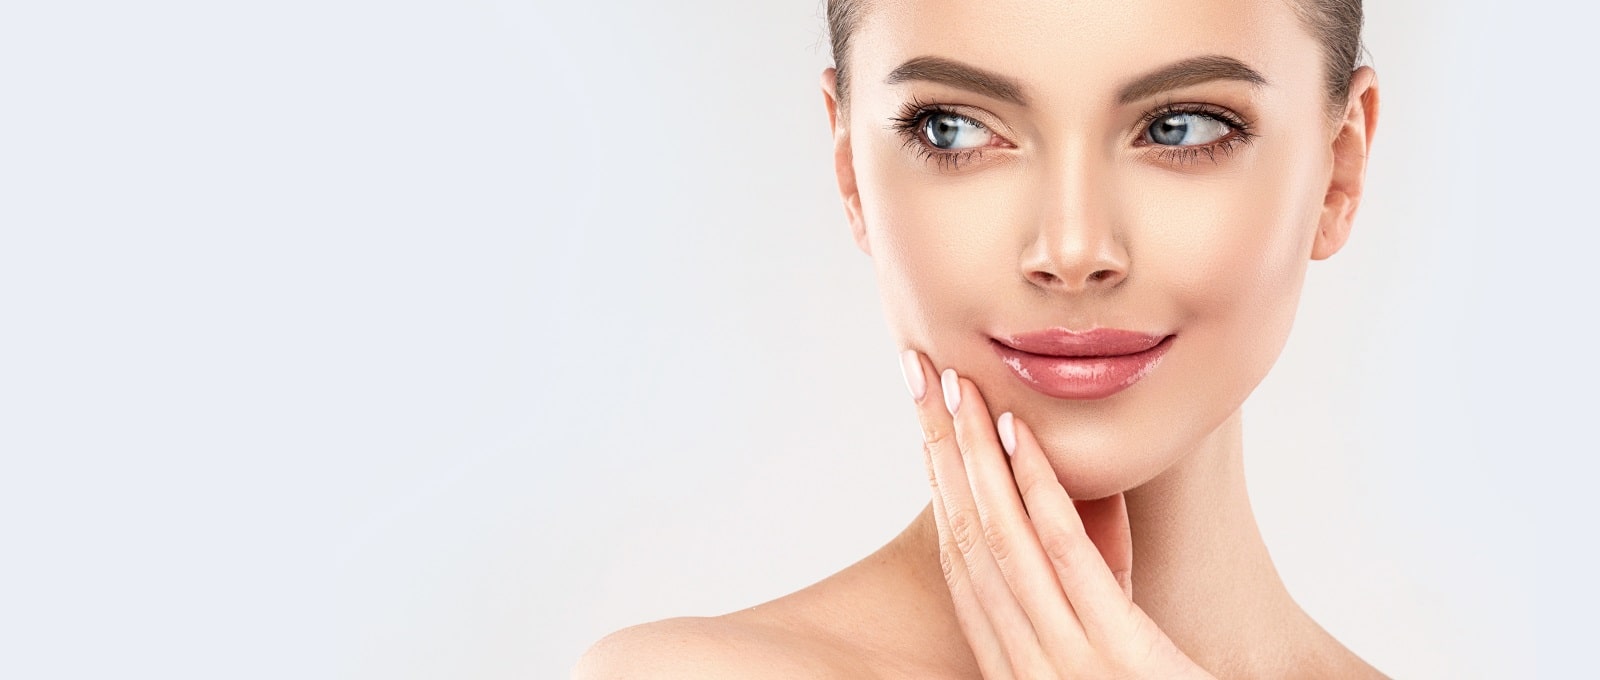 Filler & Skin Treatments One of the highest-rated dermatology clinics in Abu Dhabi